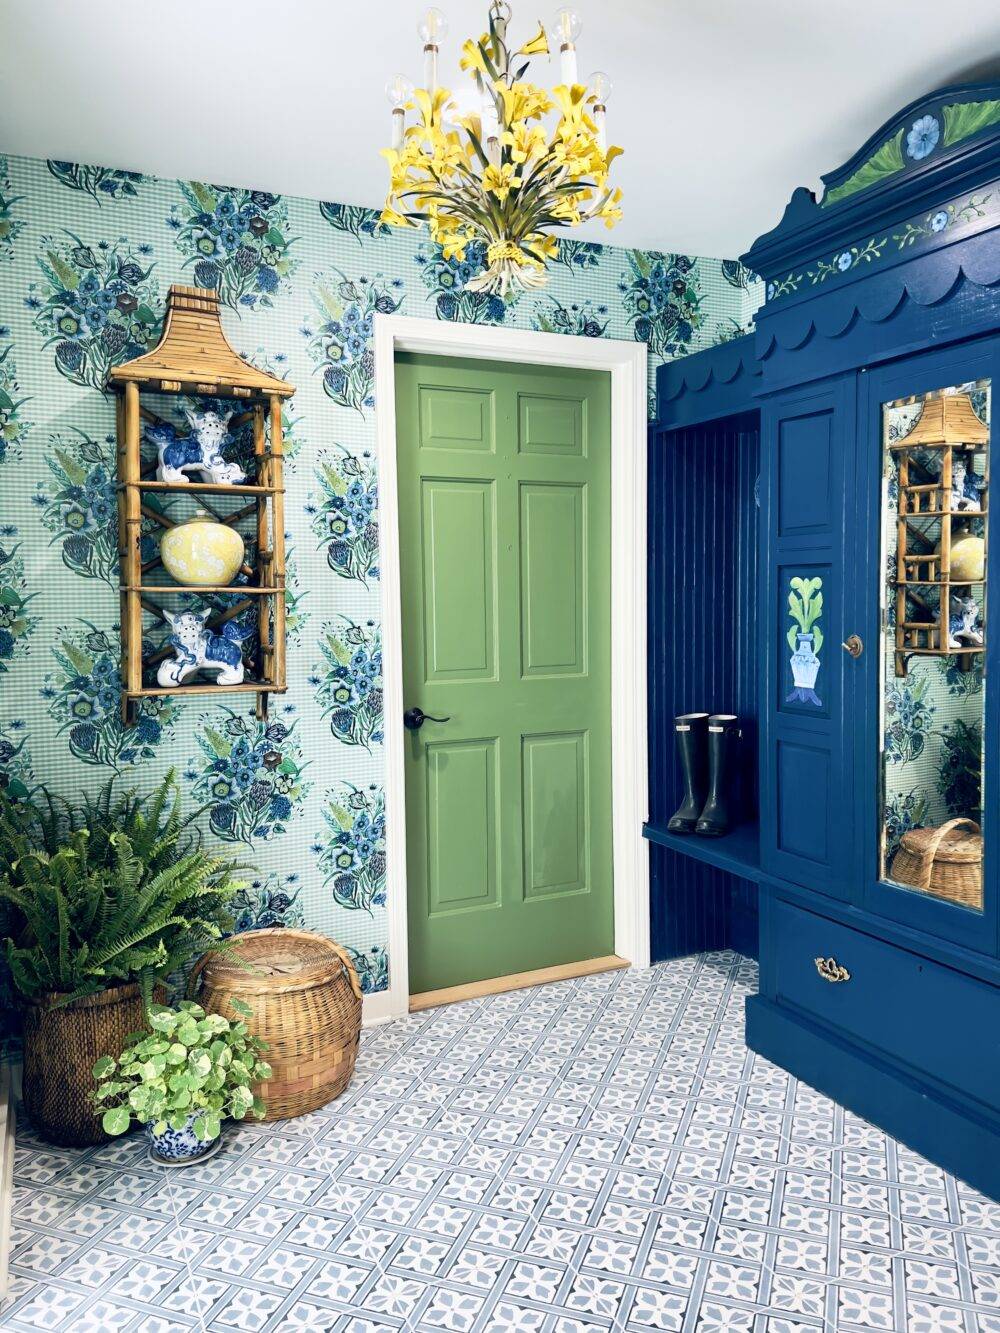 Bright blue and green entryway with blue floral patterned tile floor. 